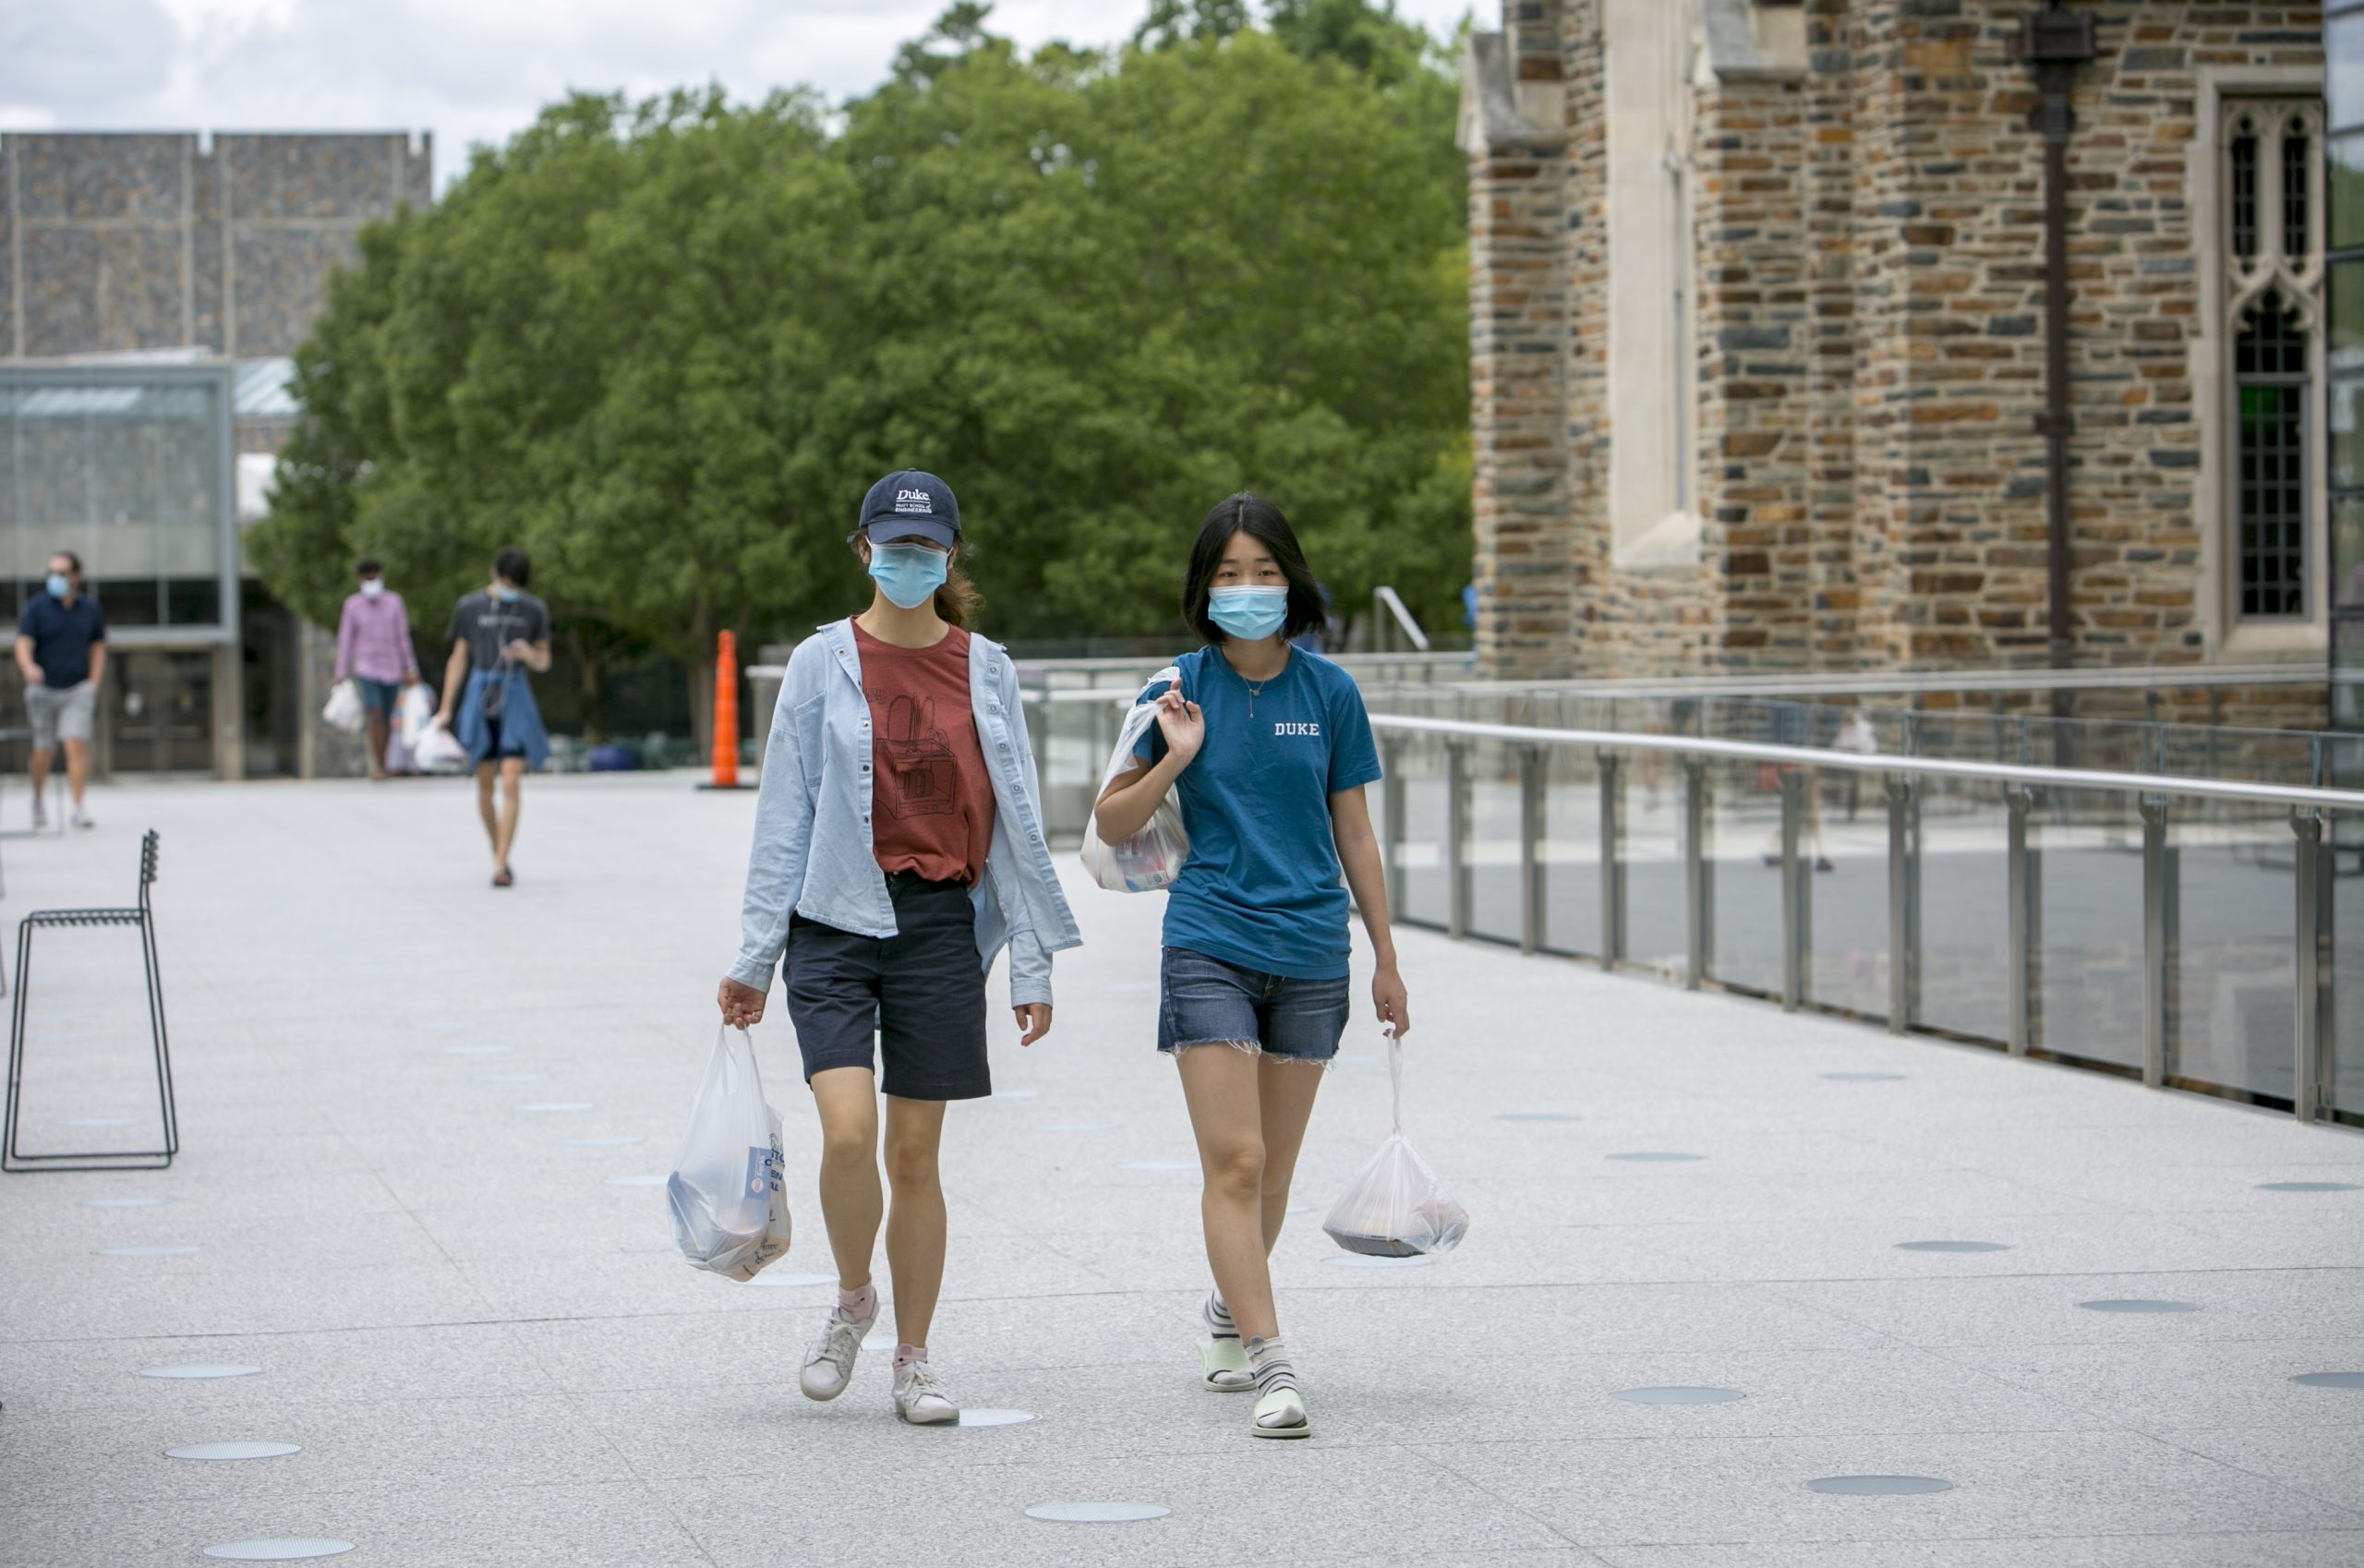 Wearing masks, juniors May Mei and Cindy Zhou walk across the Bryan Center Walkway with groceries from The Lobby Shop on West Campus.